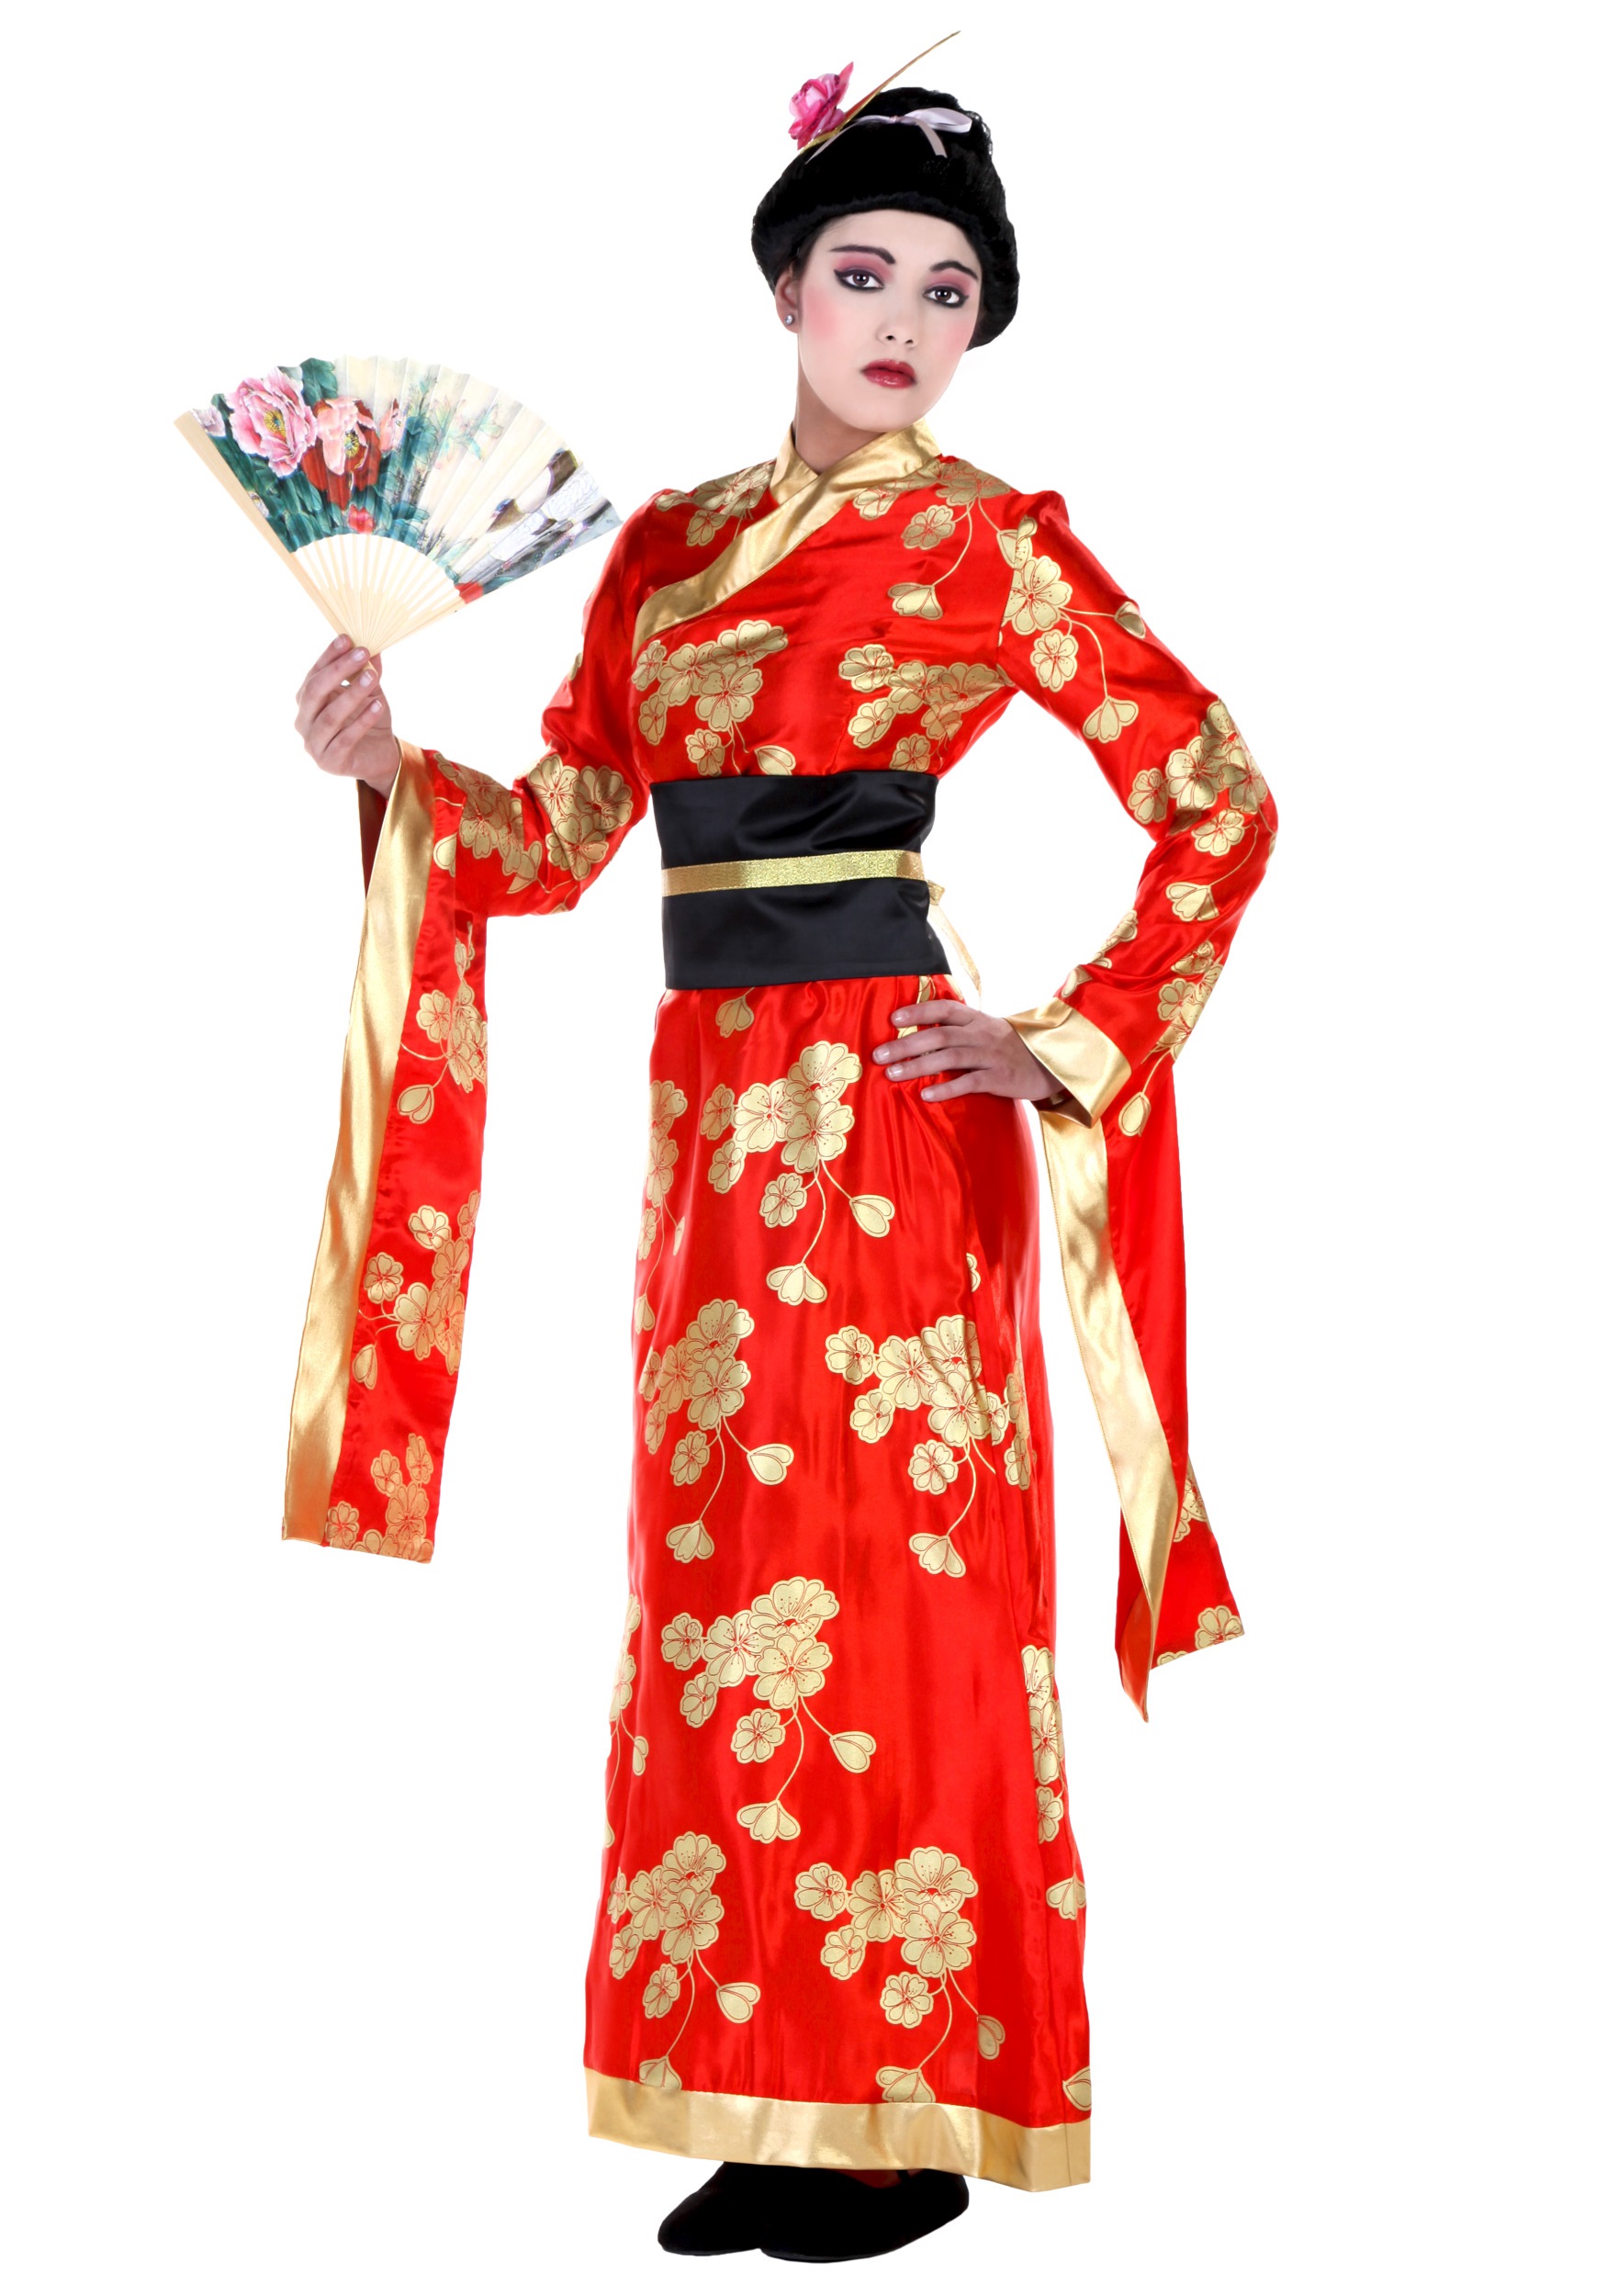 ADULT GEISHA COSTUME includes red dress obi and hair accessory